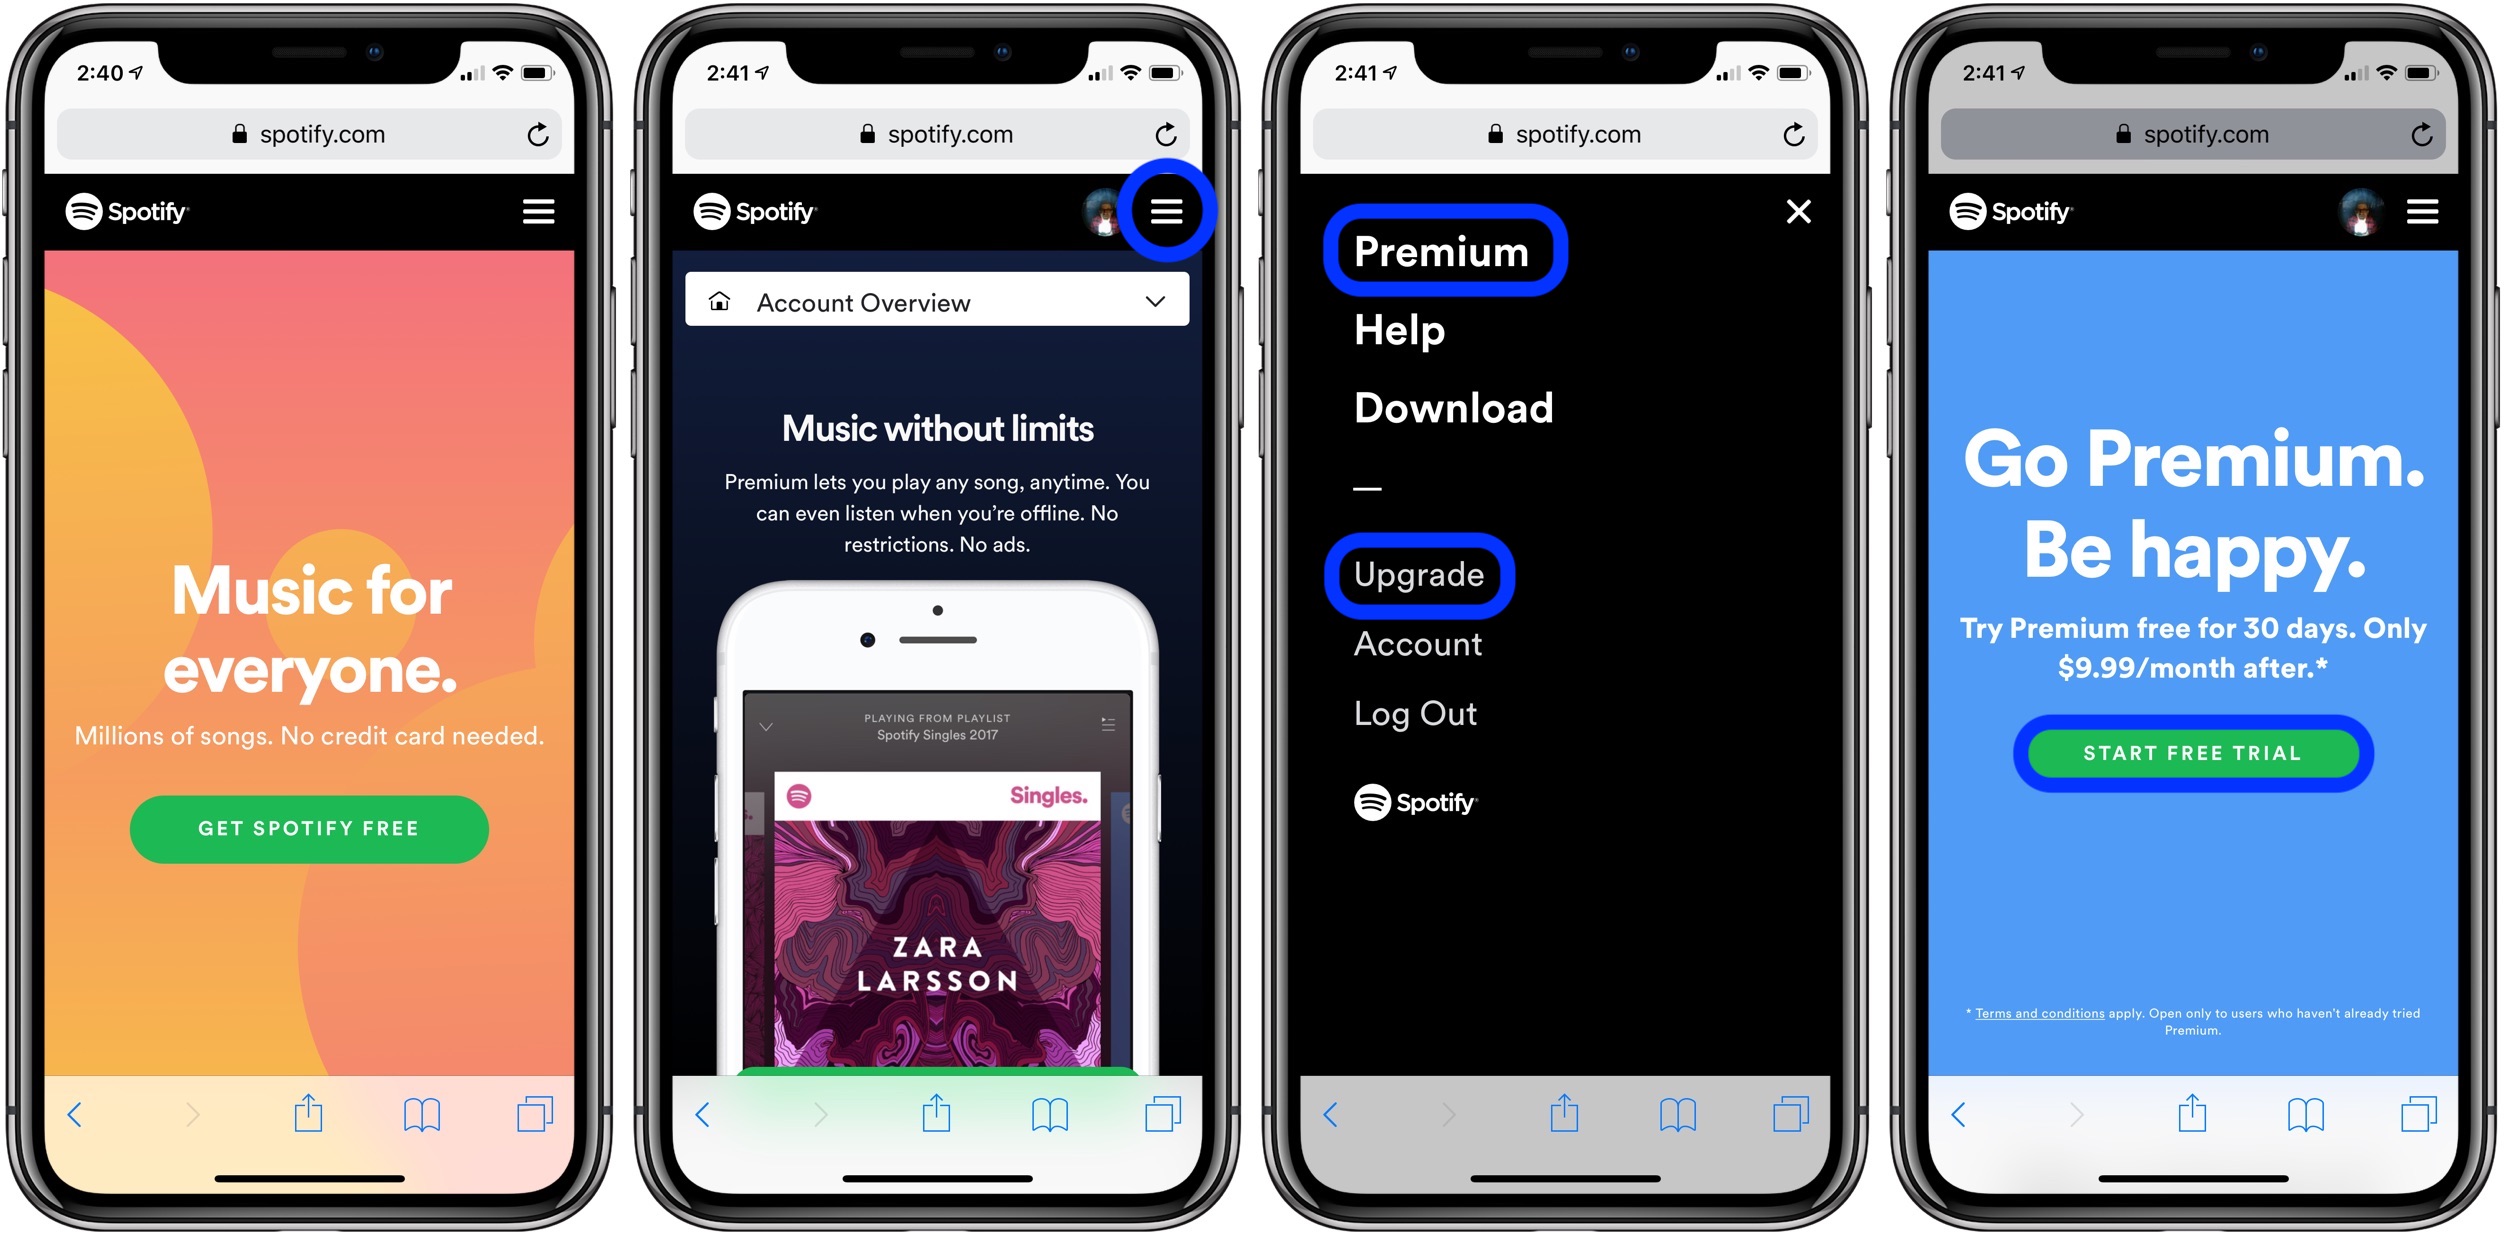 How to get Spotify Premium | Tom's Guide